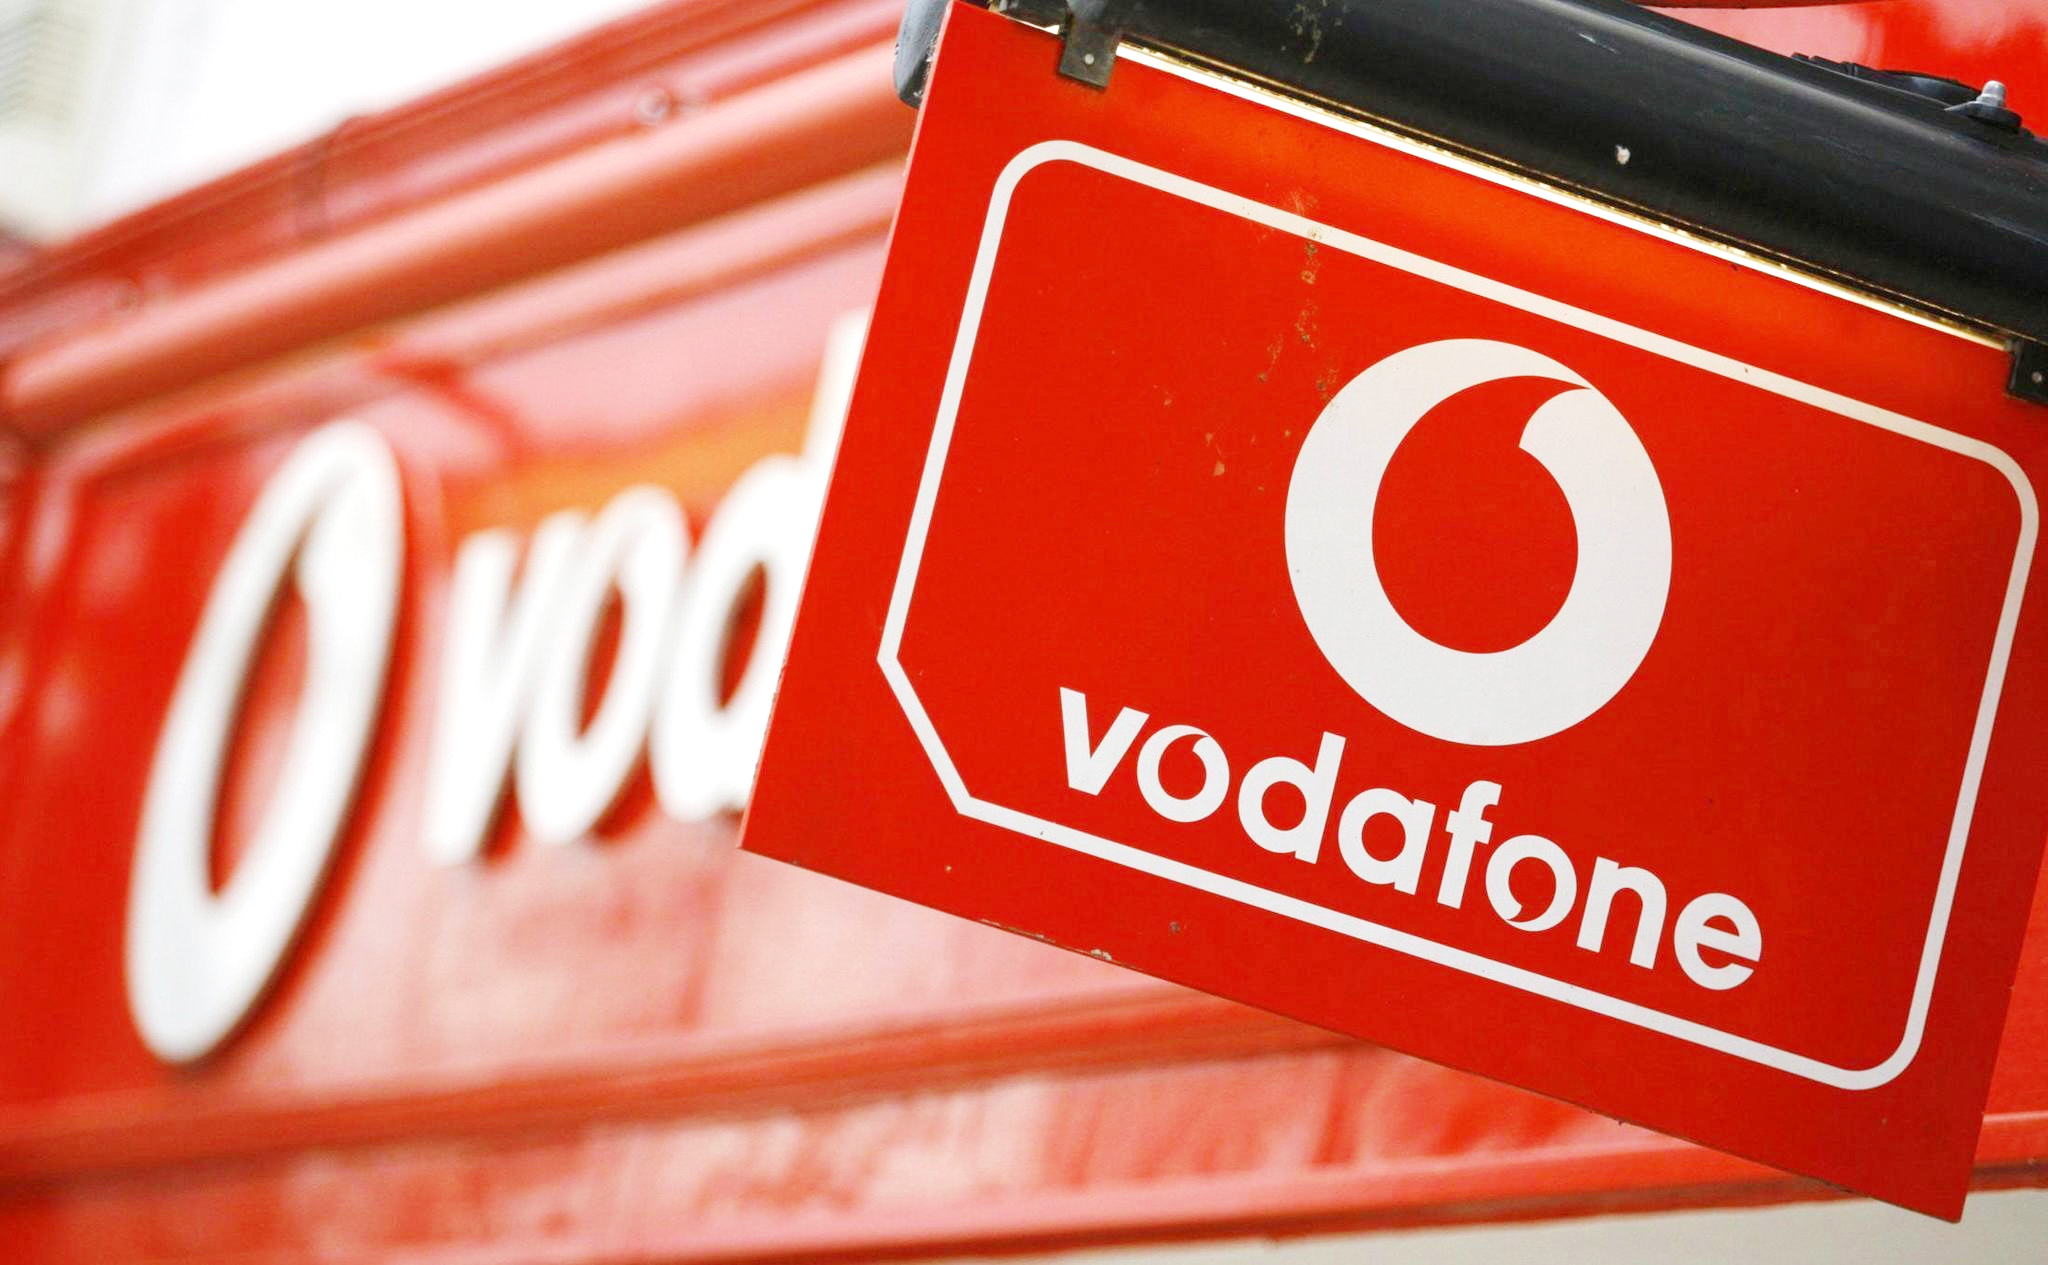 A Vodafone sign on May 30, 2006.